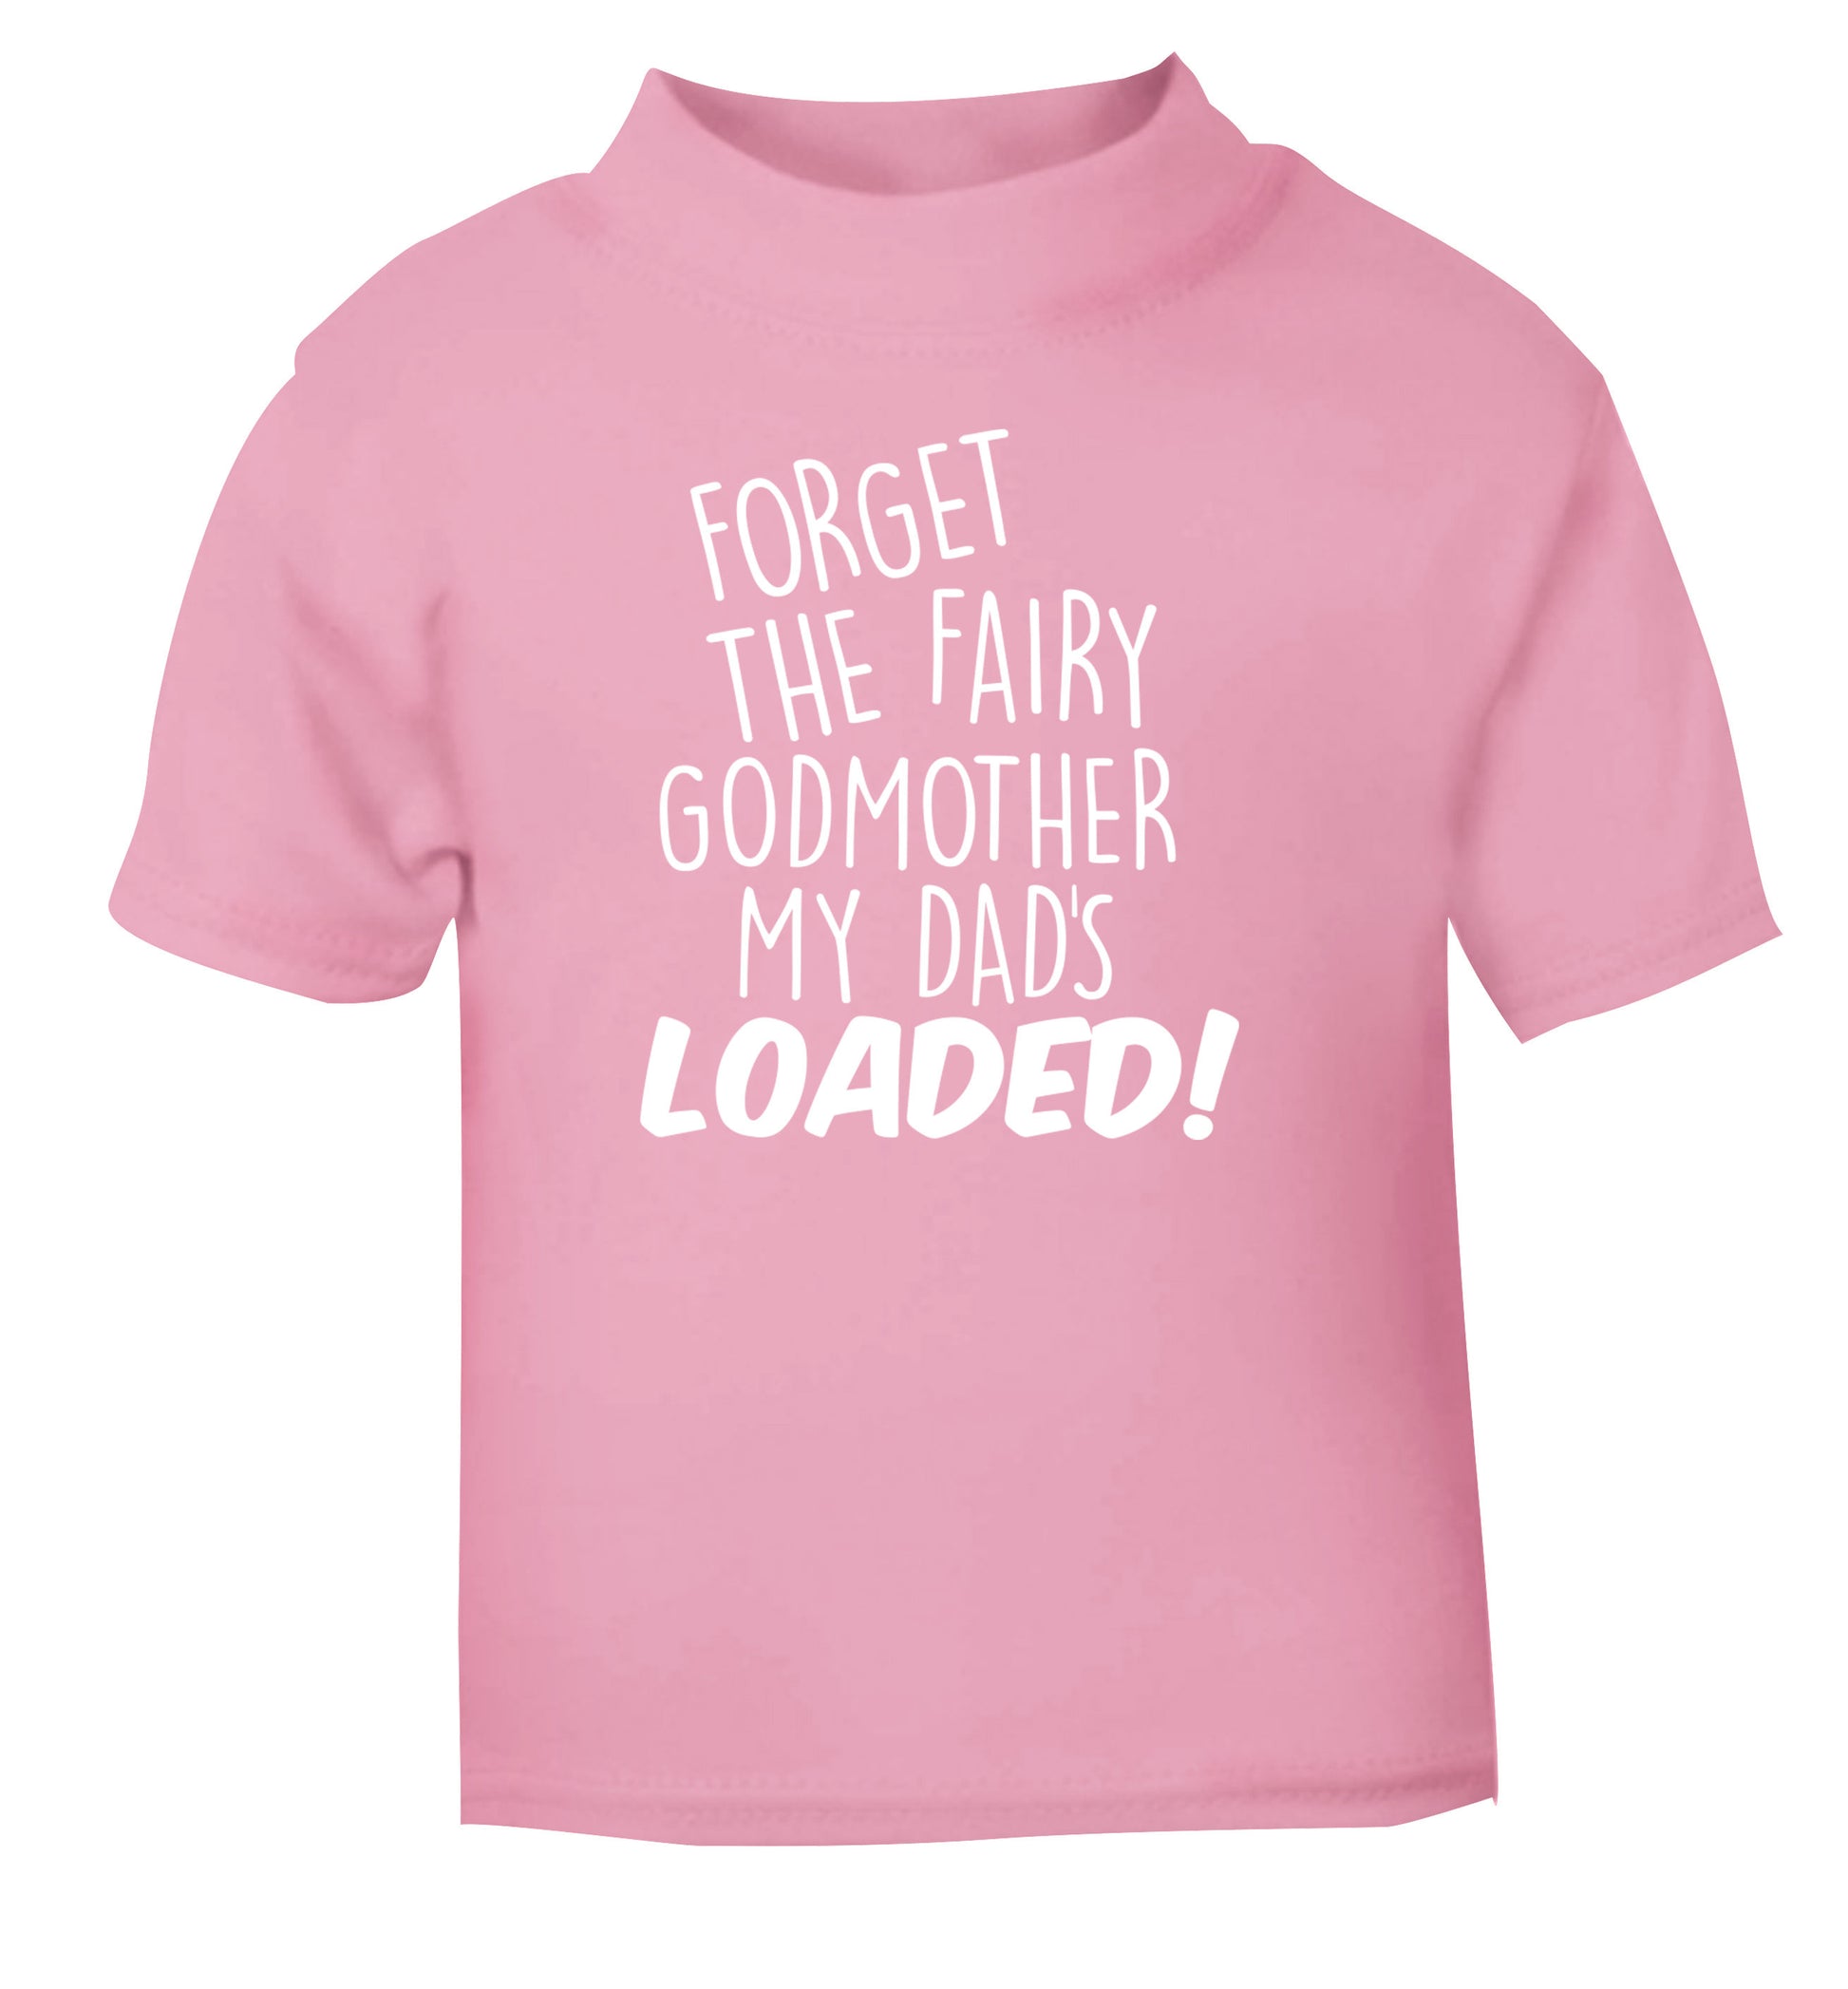 Forget the fairy godmother my dad's loaded light pink Baby Toddler Tshirt 2 Years